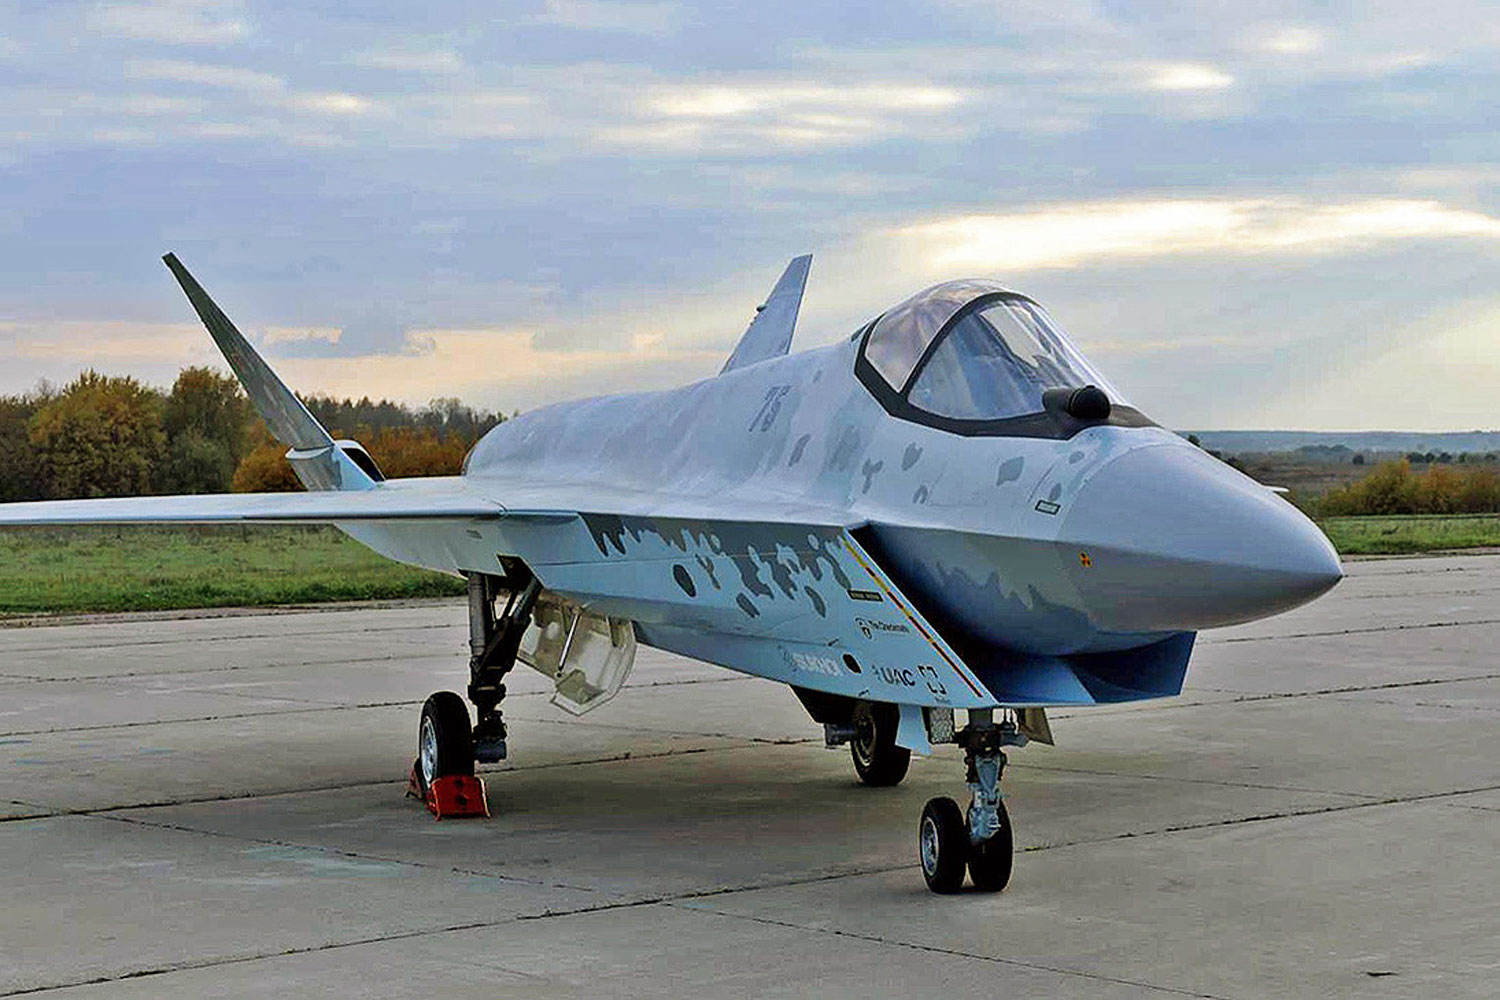 Russia’s Su-57 Fighters Coming To India! Look To ‘Checkmate’ Saab Gripen, Other Jets For Indian Air Force Deal